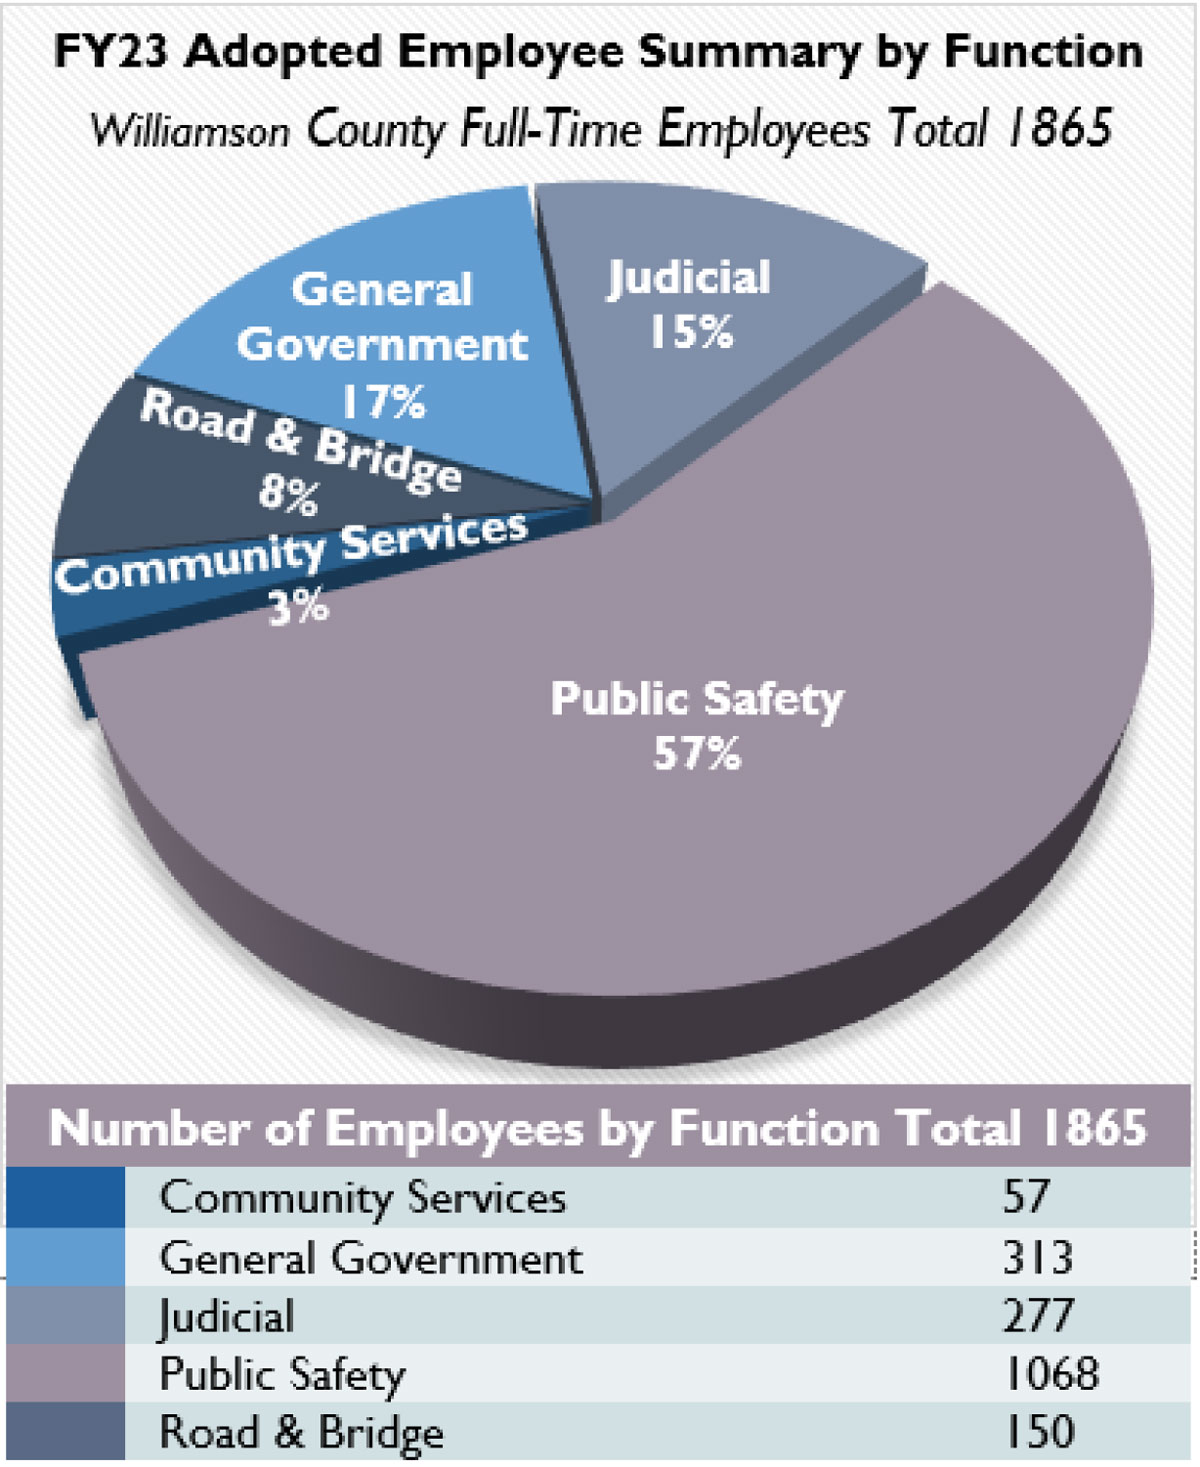 FY 23 Adopted Employee Summary by Function (Williamson County Full-Time Employees Total 1865) Community Services 57 employees 3%, Road & Bridge 150 employees 8%, Judicial 277 employees 15%, General Government 313 employees 17%, Public Safety 1068 employees 57%